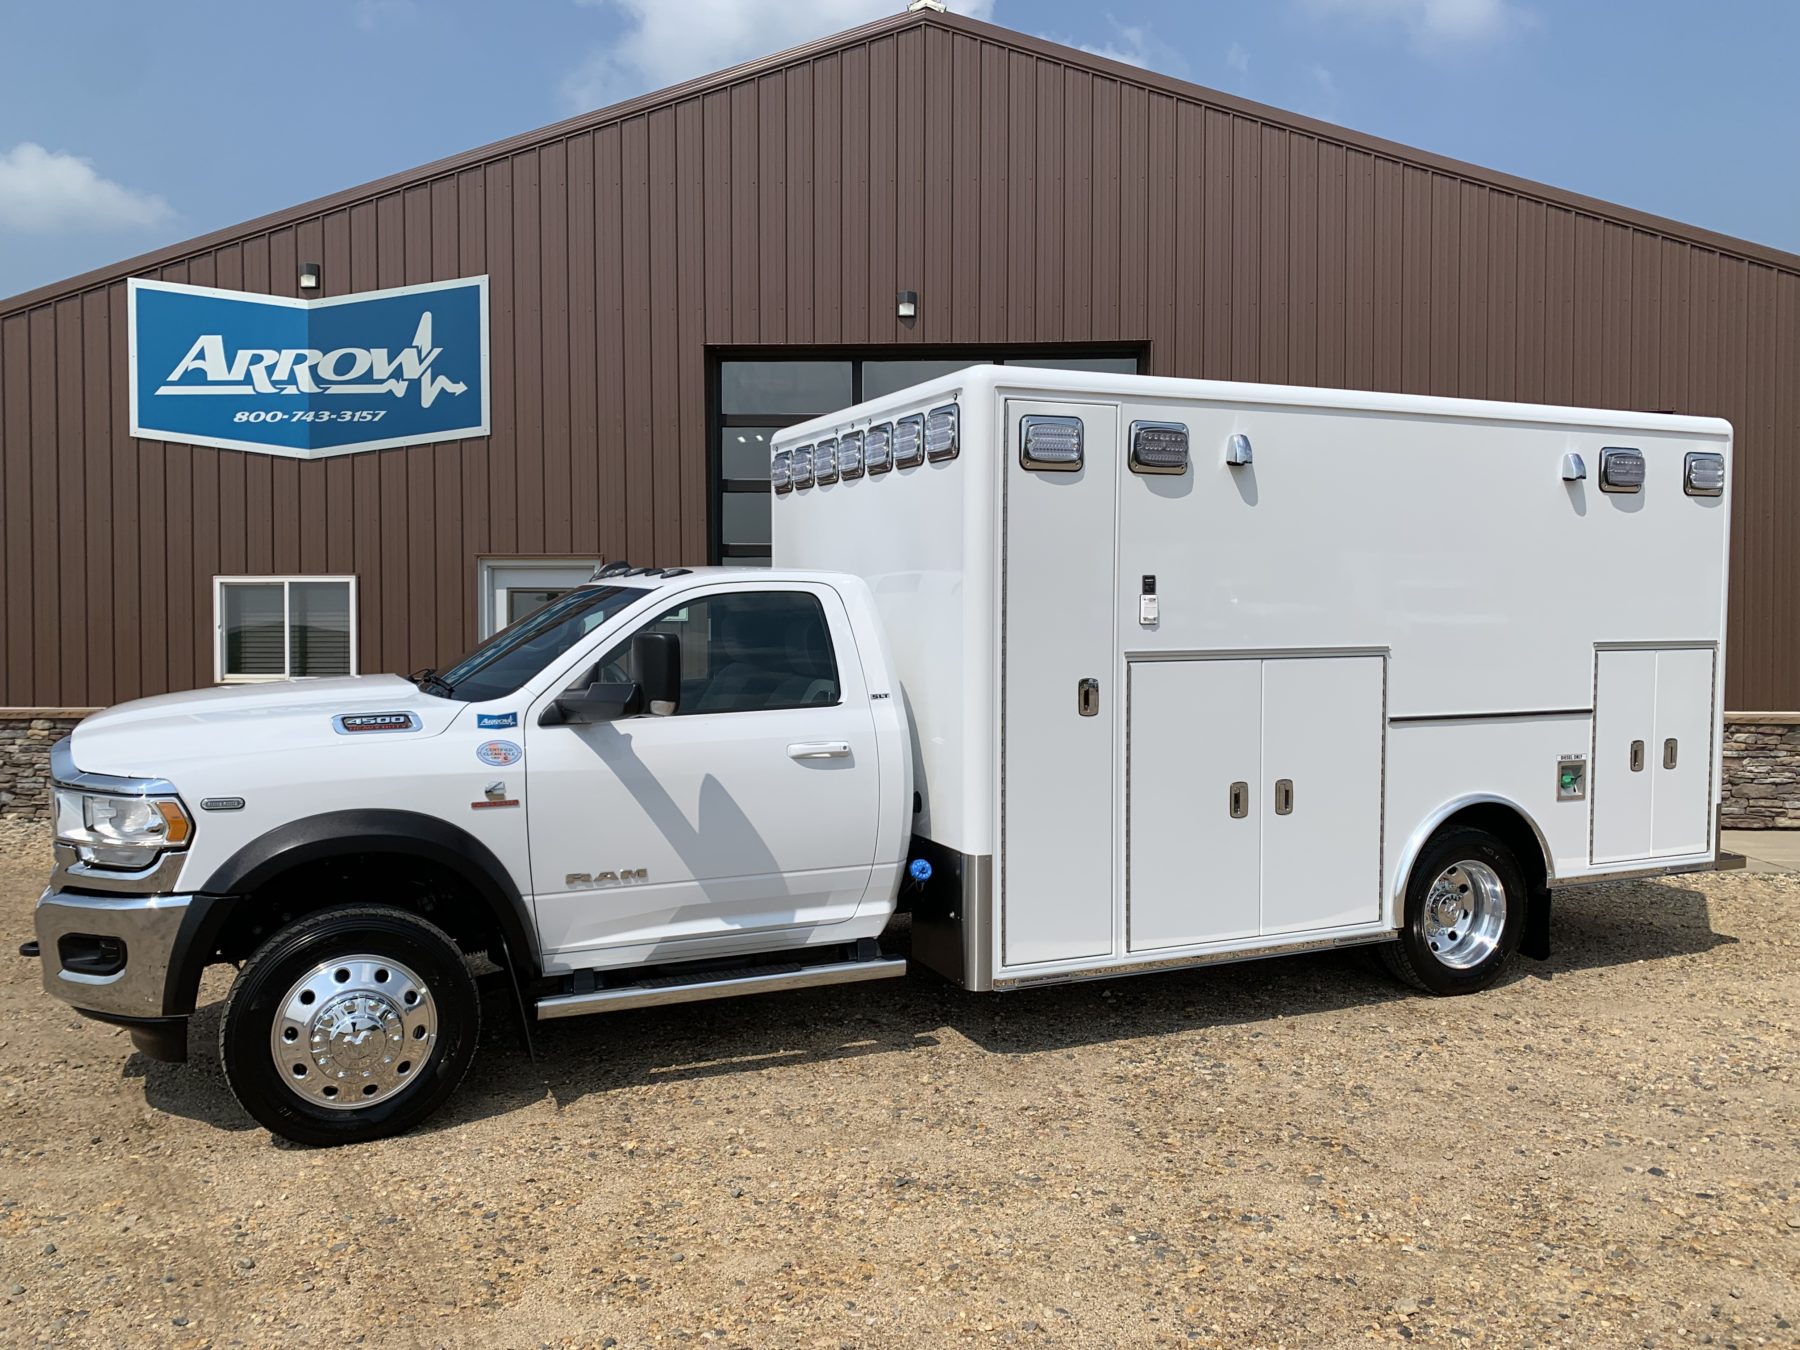 2021 Ram 4500 4x4 Heavy Duty Ambulance For Sale – Picture 10